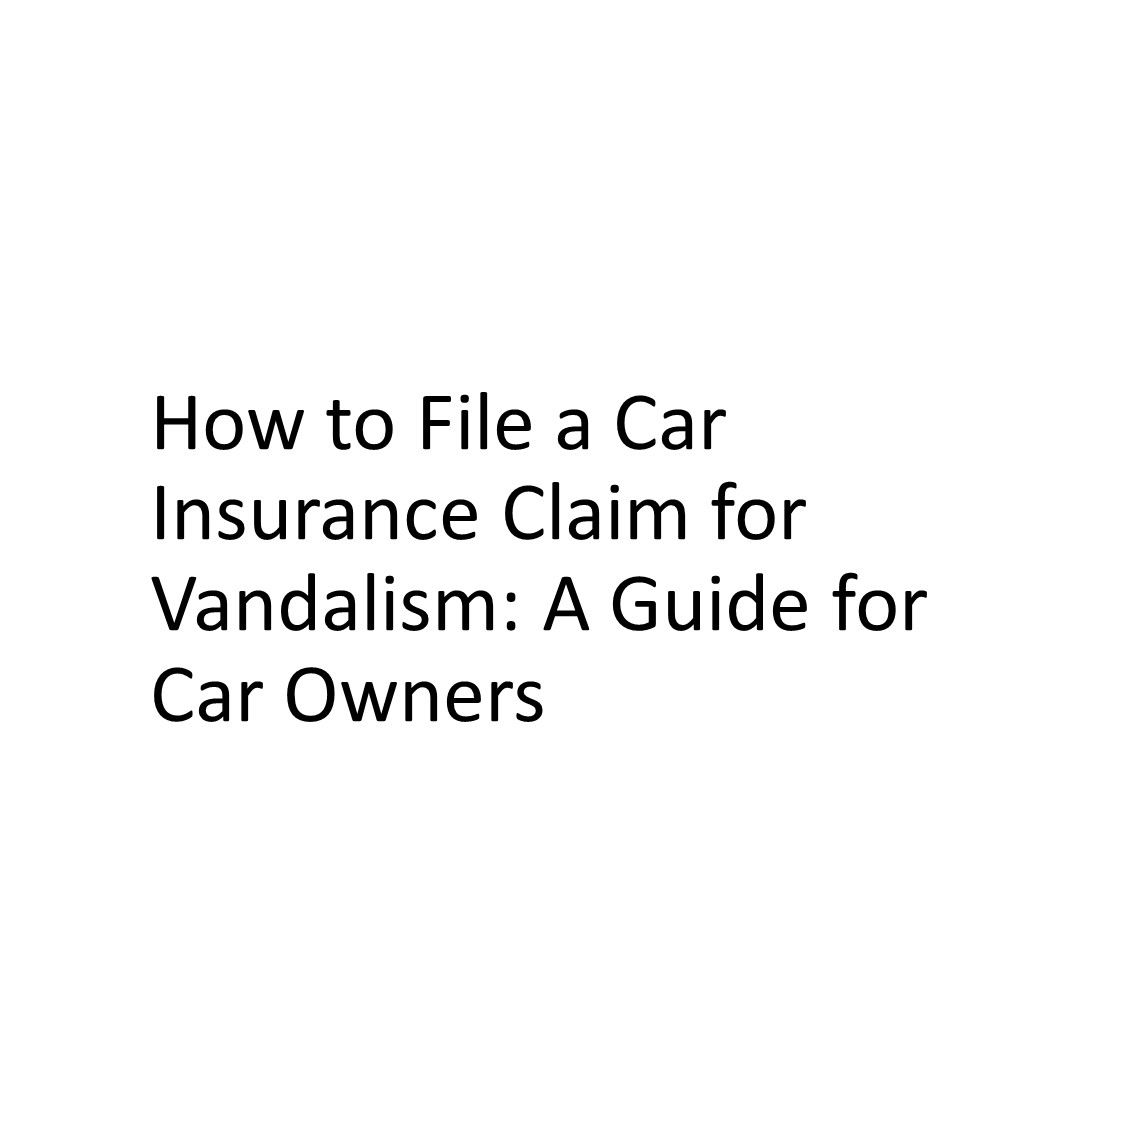 How to File a Car Insurance Claim for Vandalism: A Guide for Car Owners